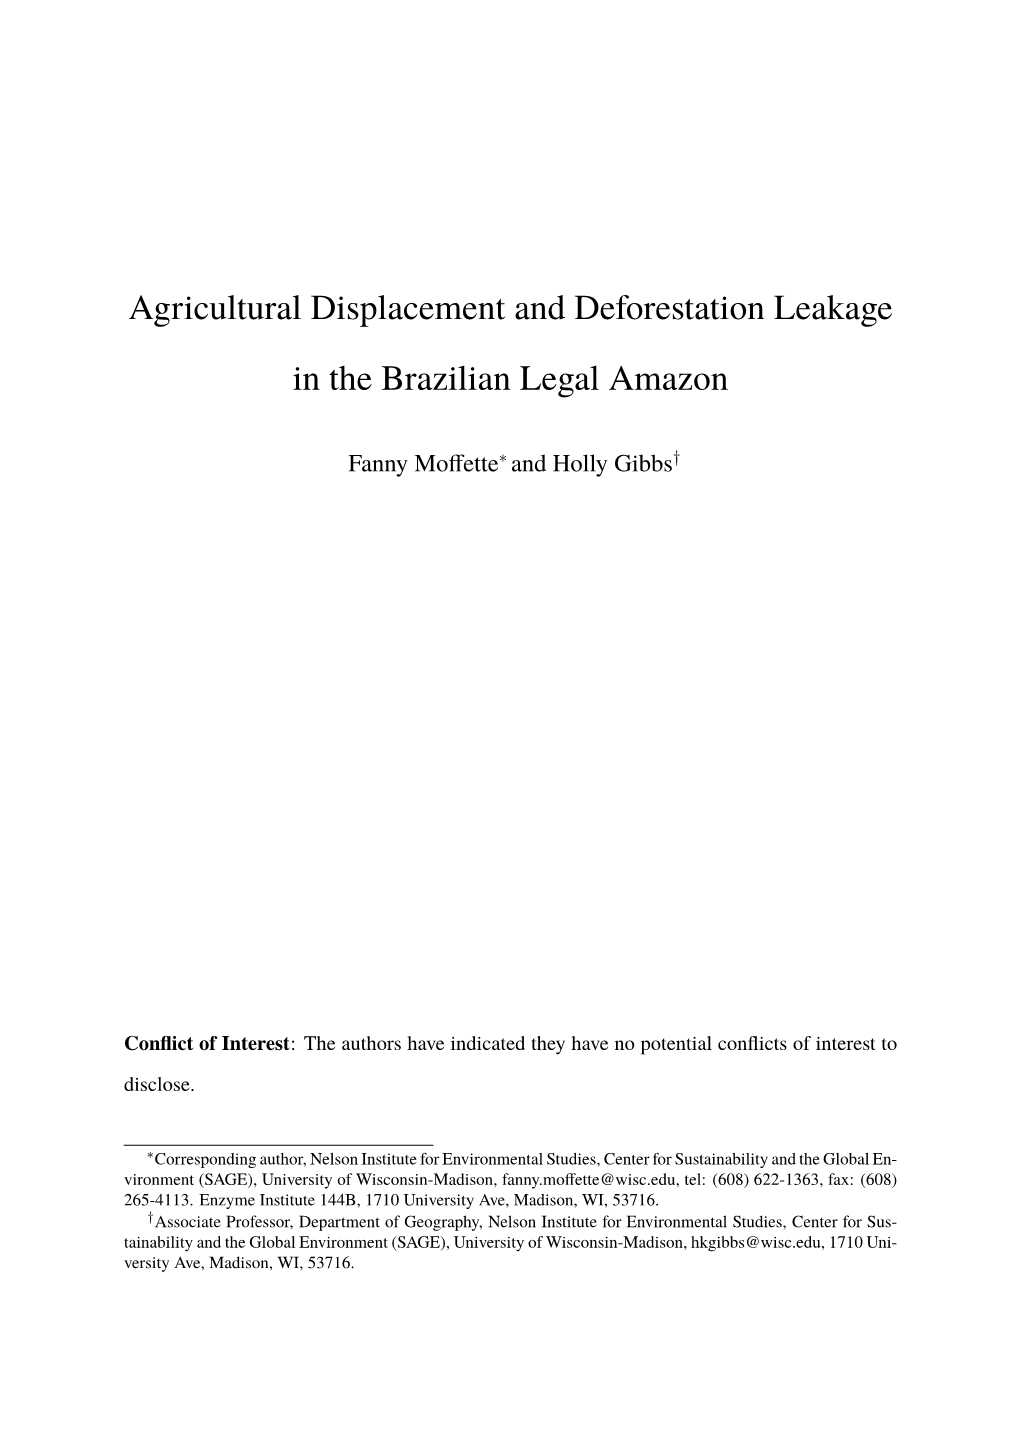 Agricultural Displacement and Deforestation Leakage in the Brazilian Legal Amazon